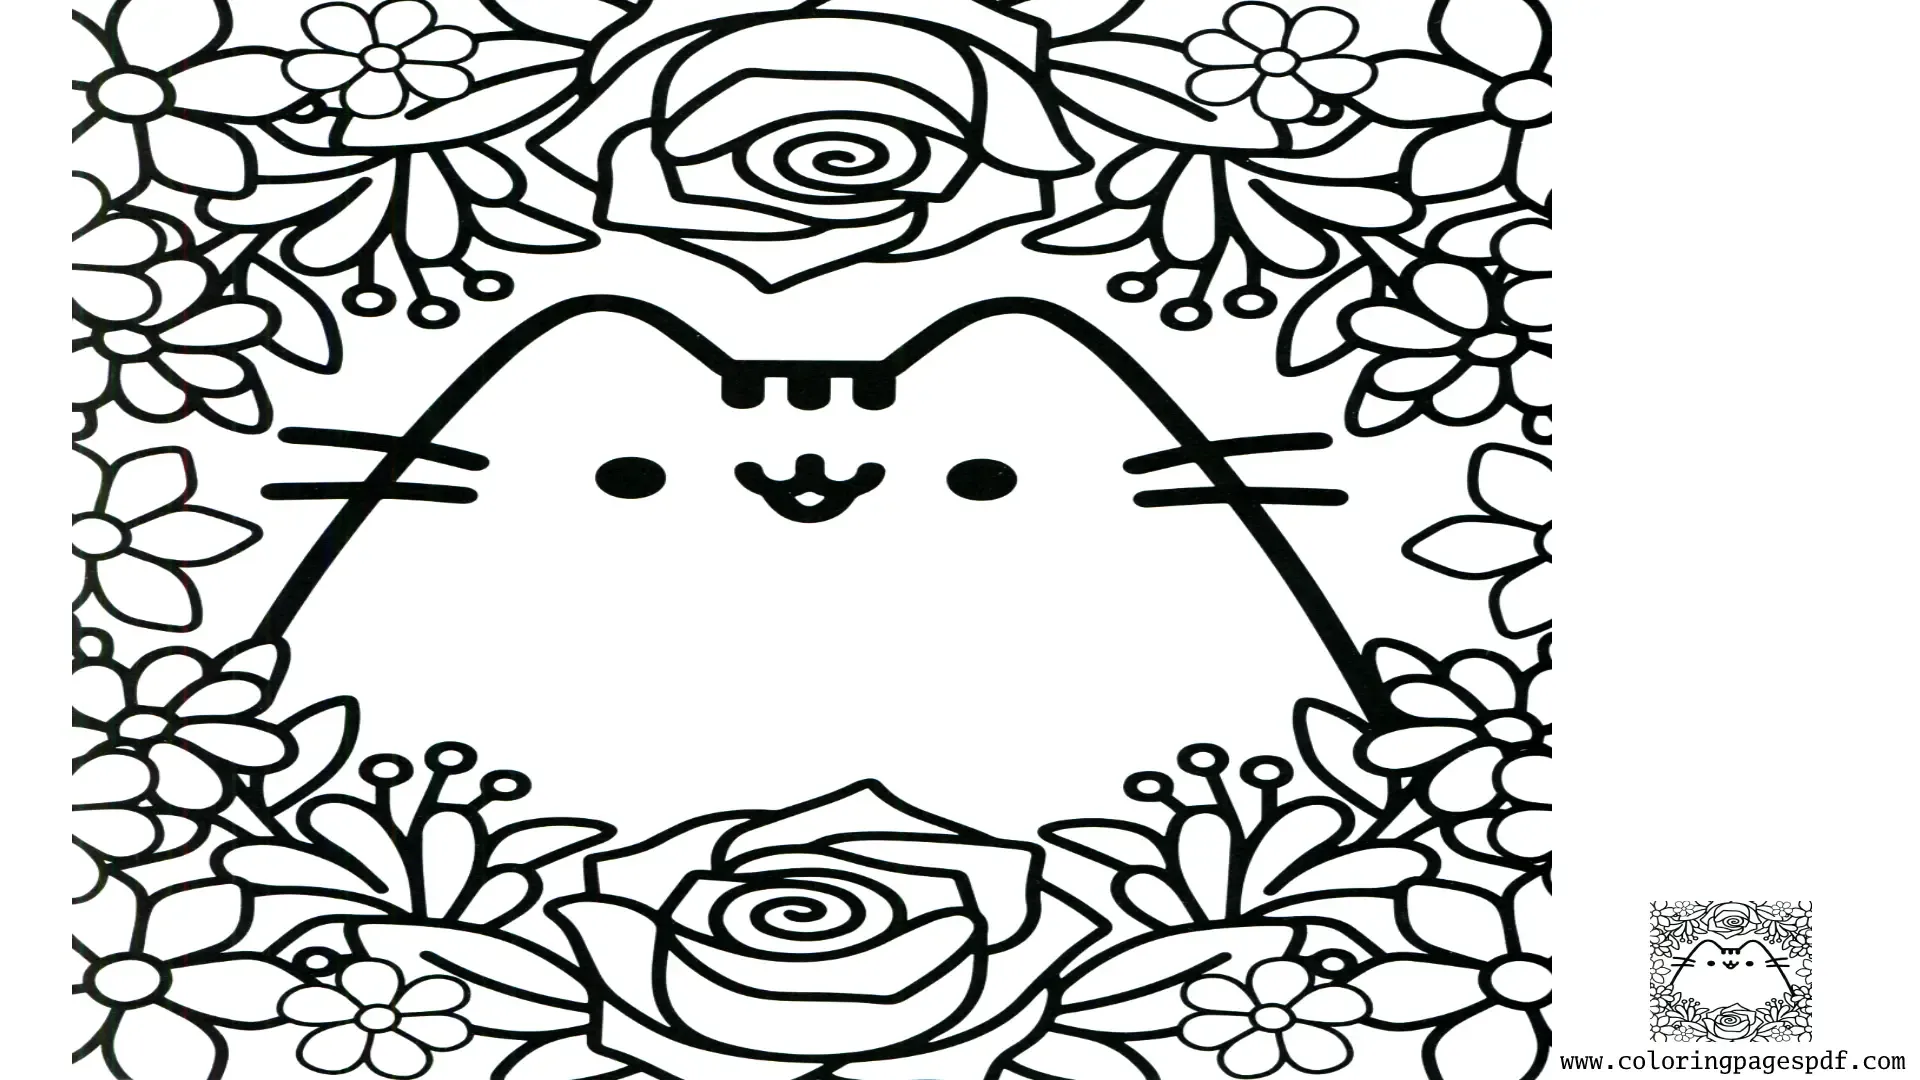 Coloring Page Of A Cute Fat Cat Surrounded By Flowers